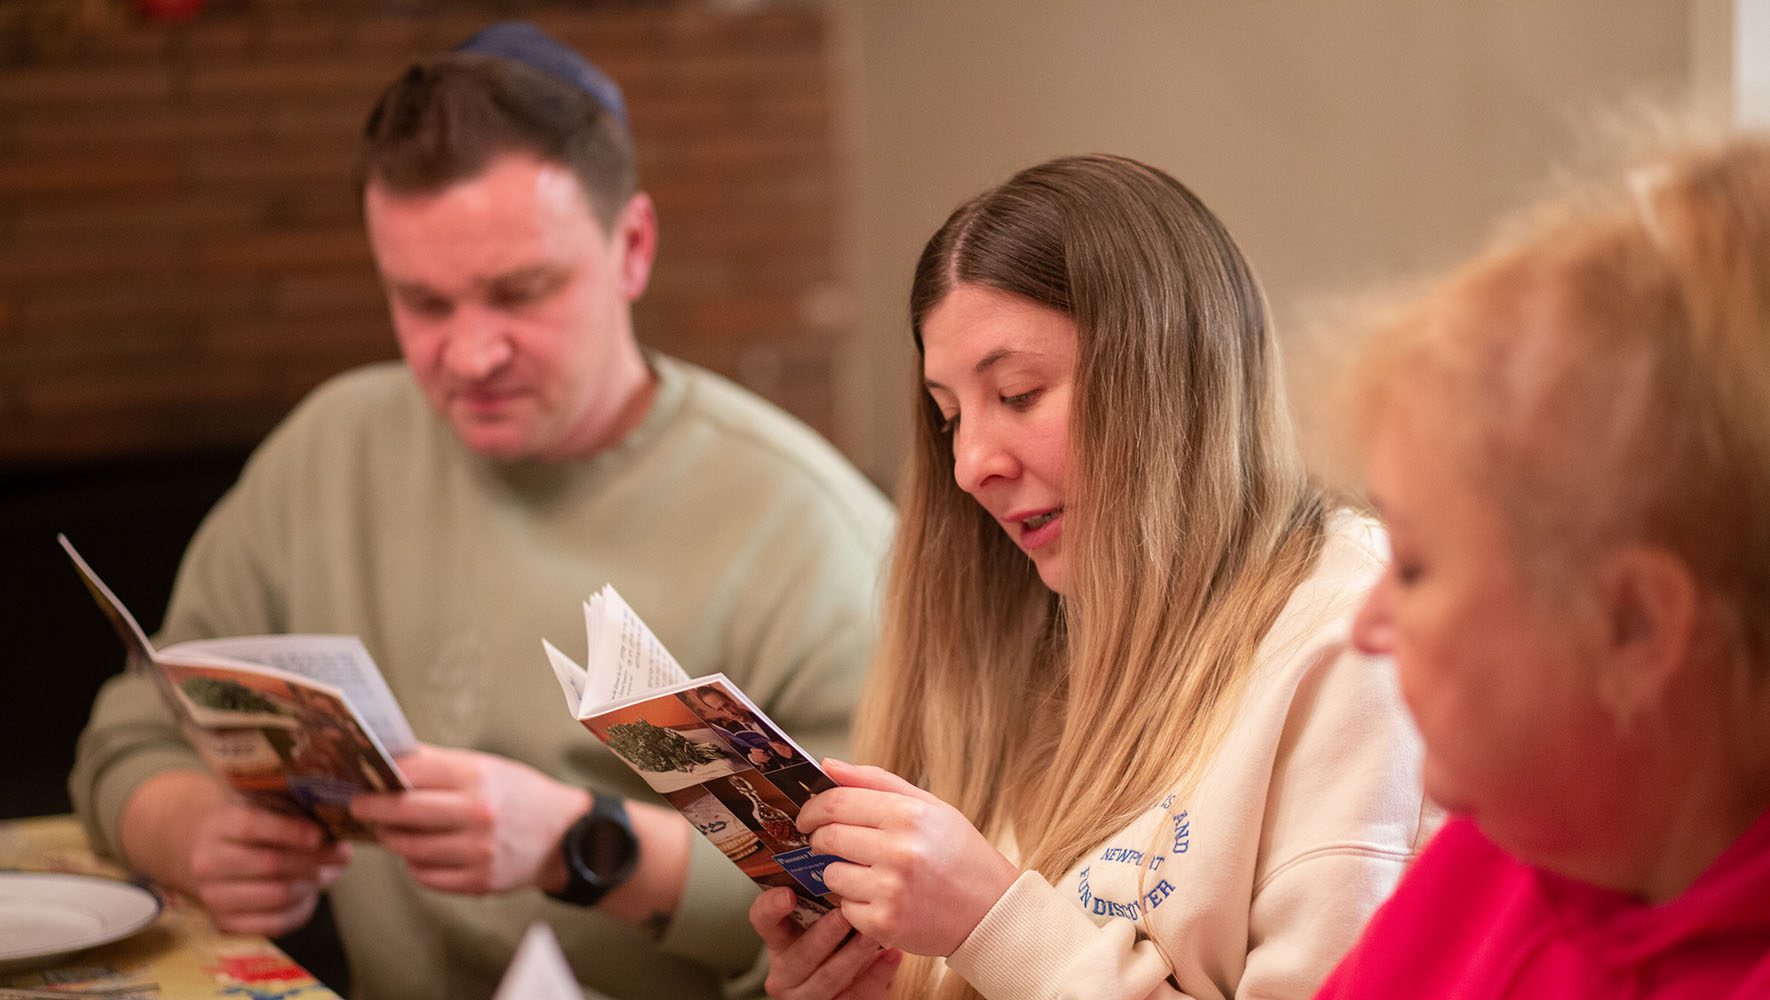 Daria Levit, center, reads from the Haggadah in English as her husband Eduard Levit,left, and mother-in-law Tamila Kushnarova, right, listen, during the Passover Seder. | In Time for Passover, Ukrainians Find Jewish Community in U.S. | HIAS